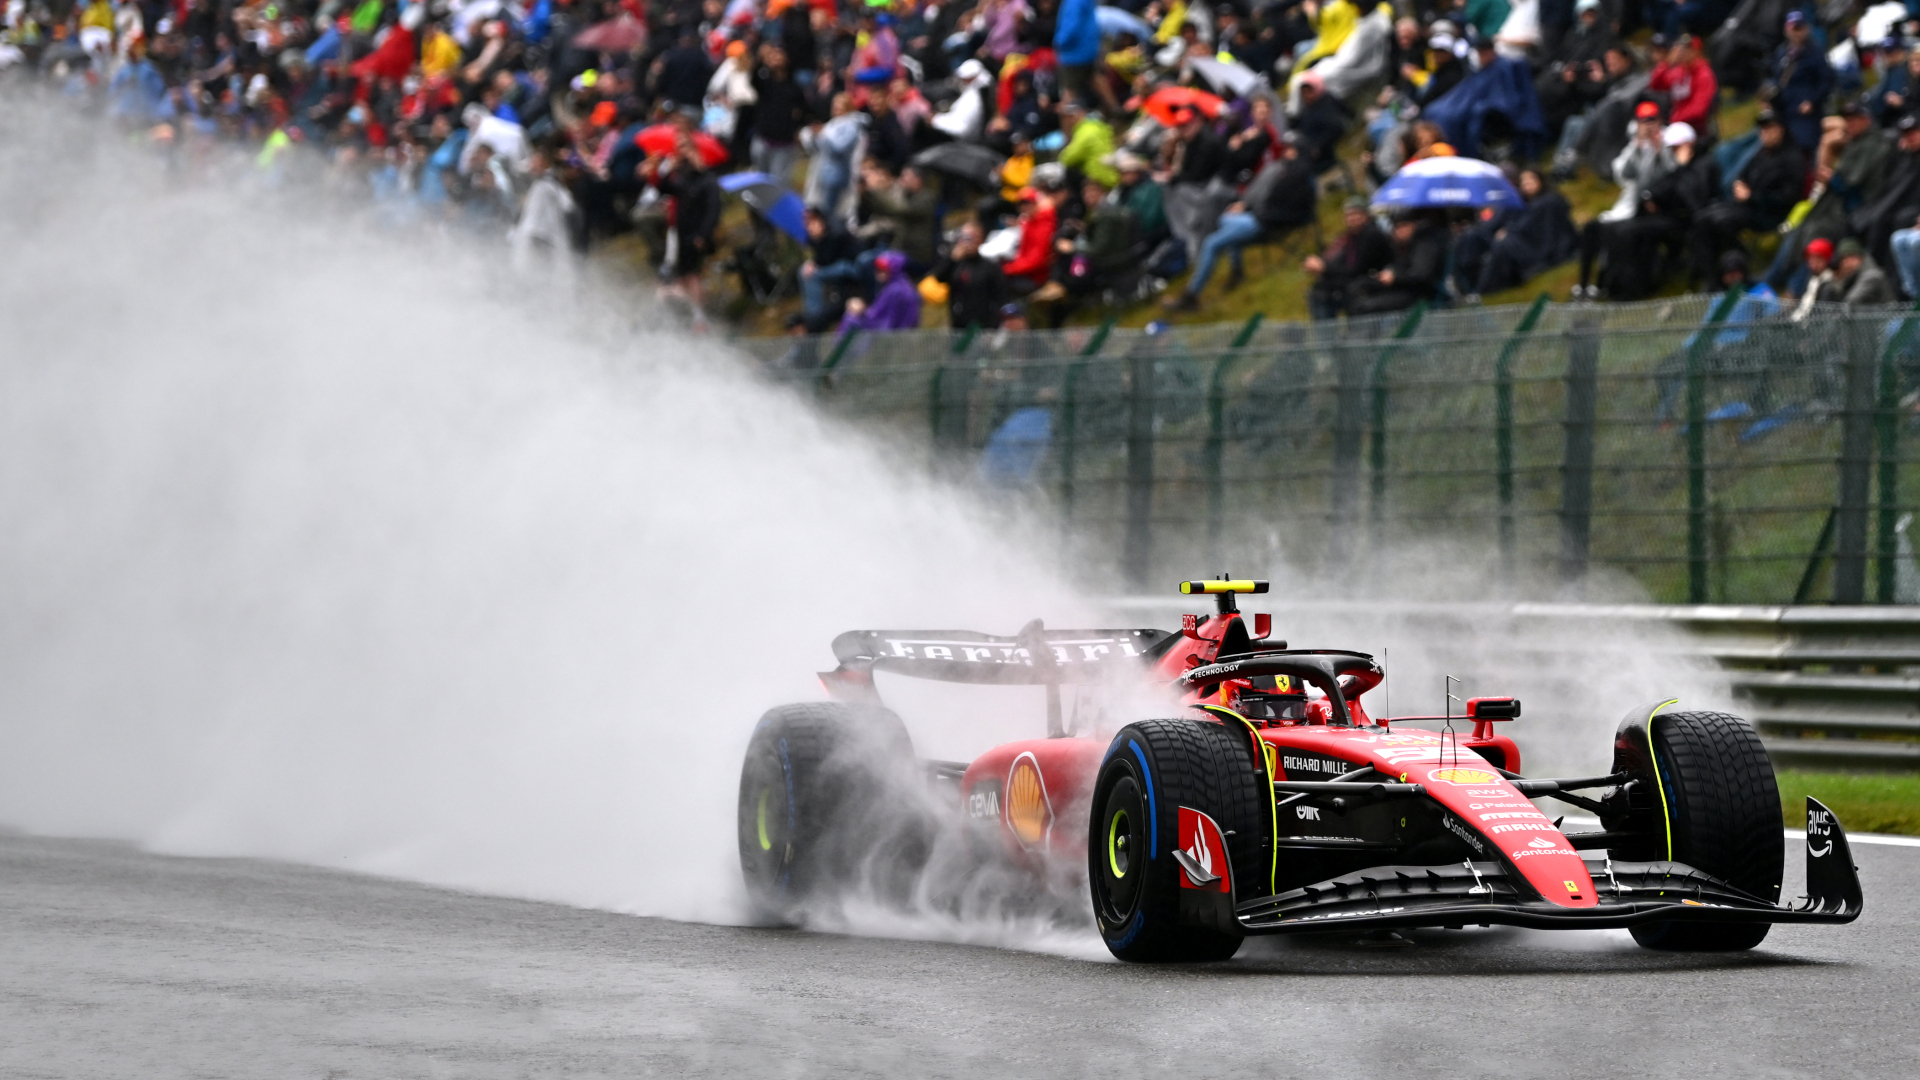 F1’s Wet Weather Problem Is Proving Tricky To Solve